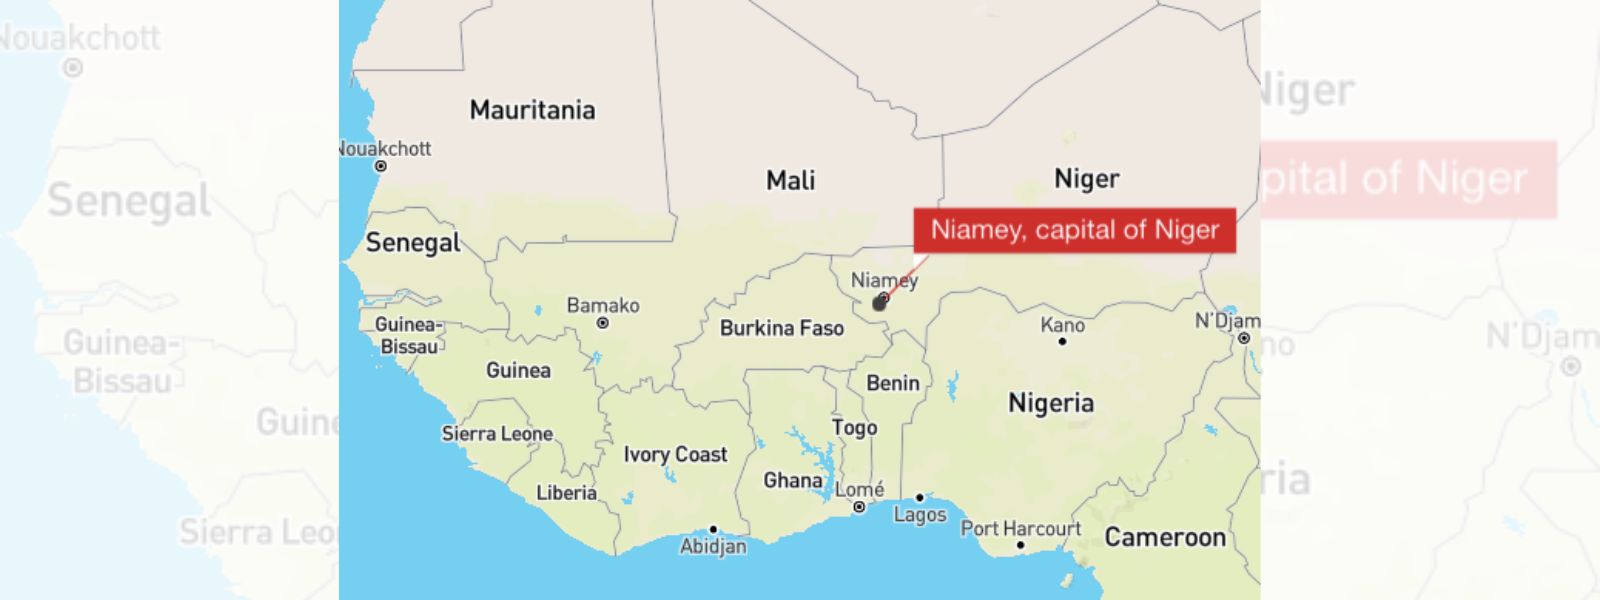 Niger coup leaders refuse to back down